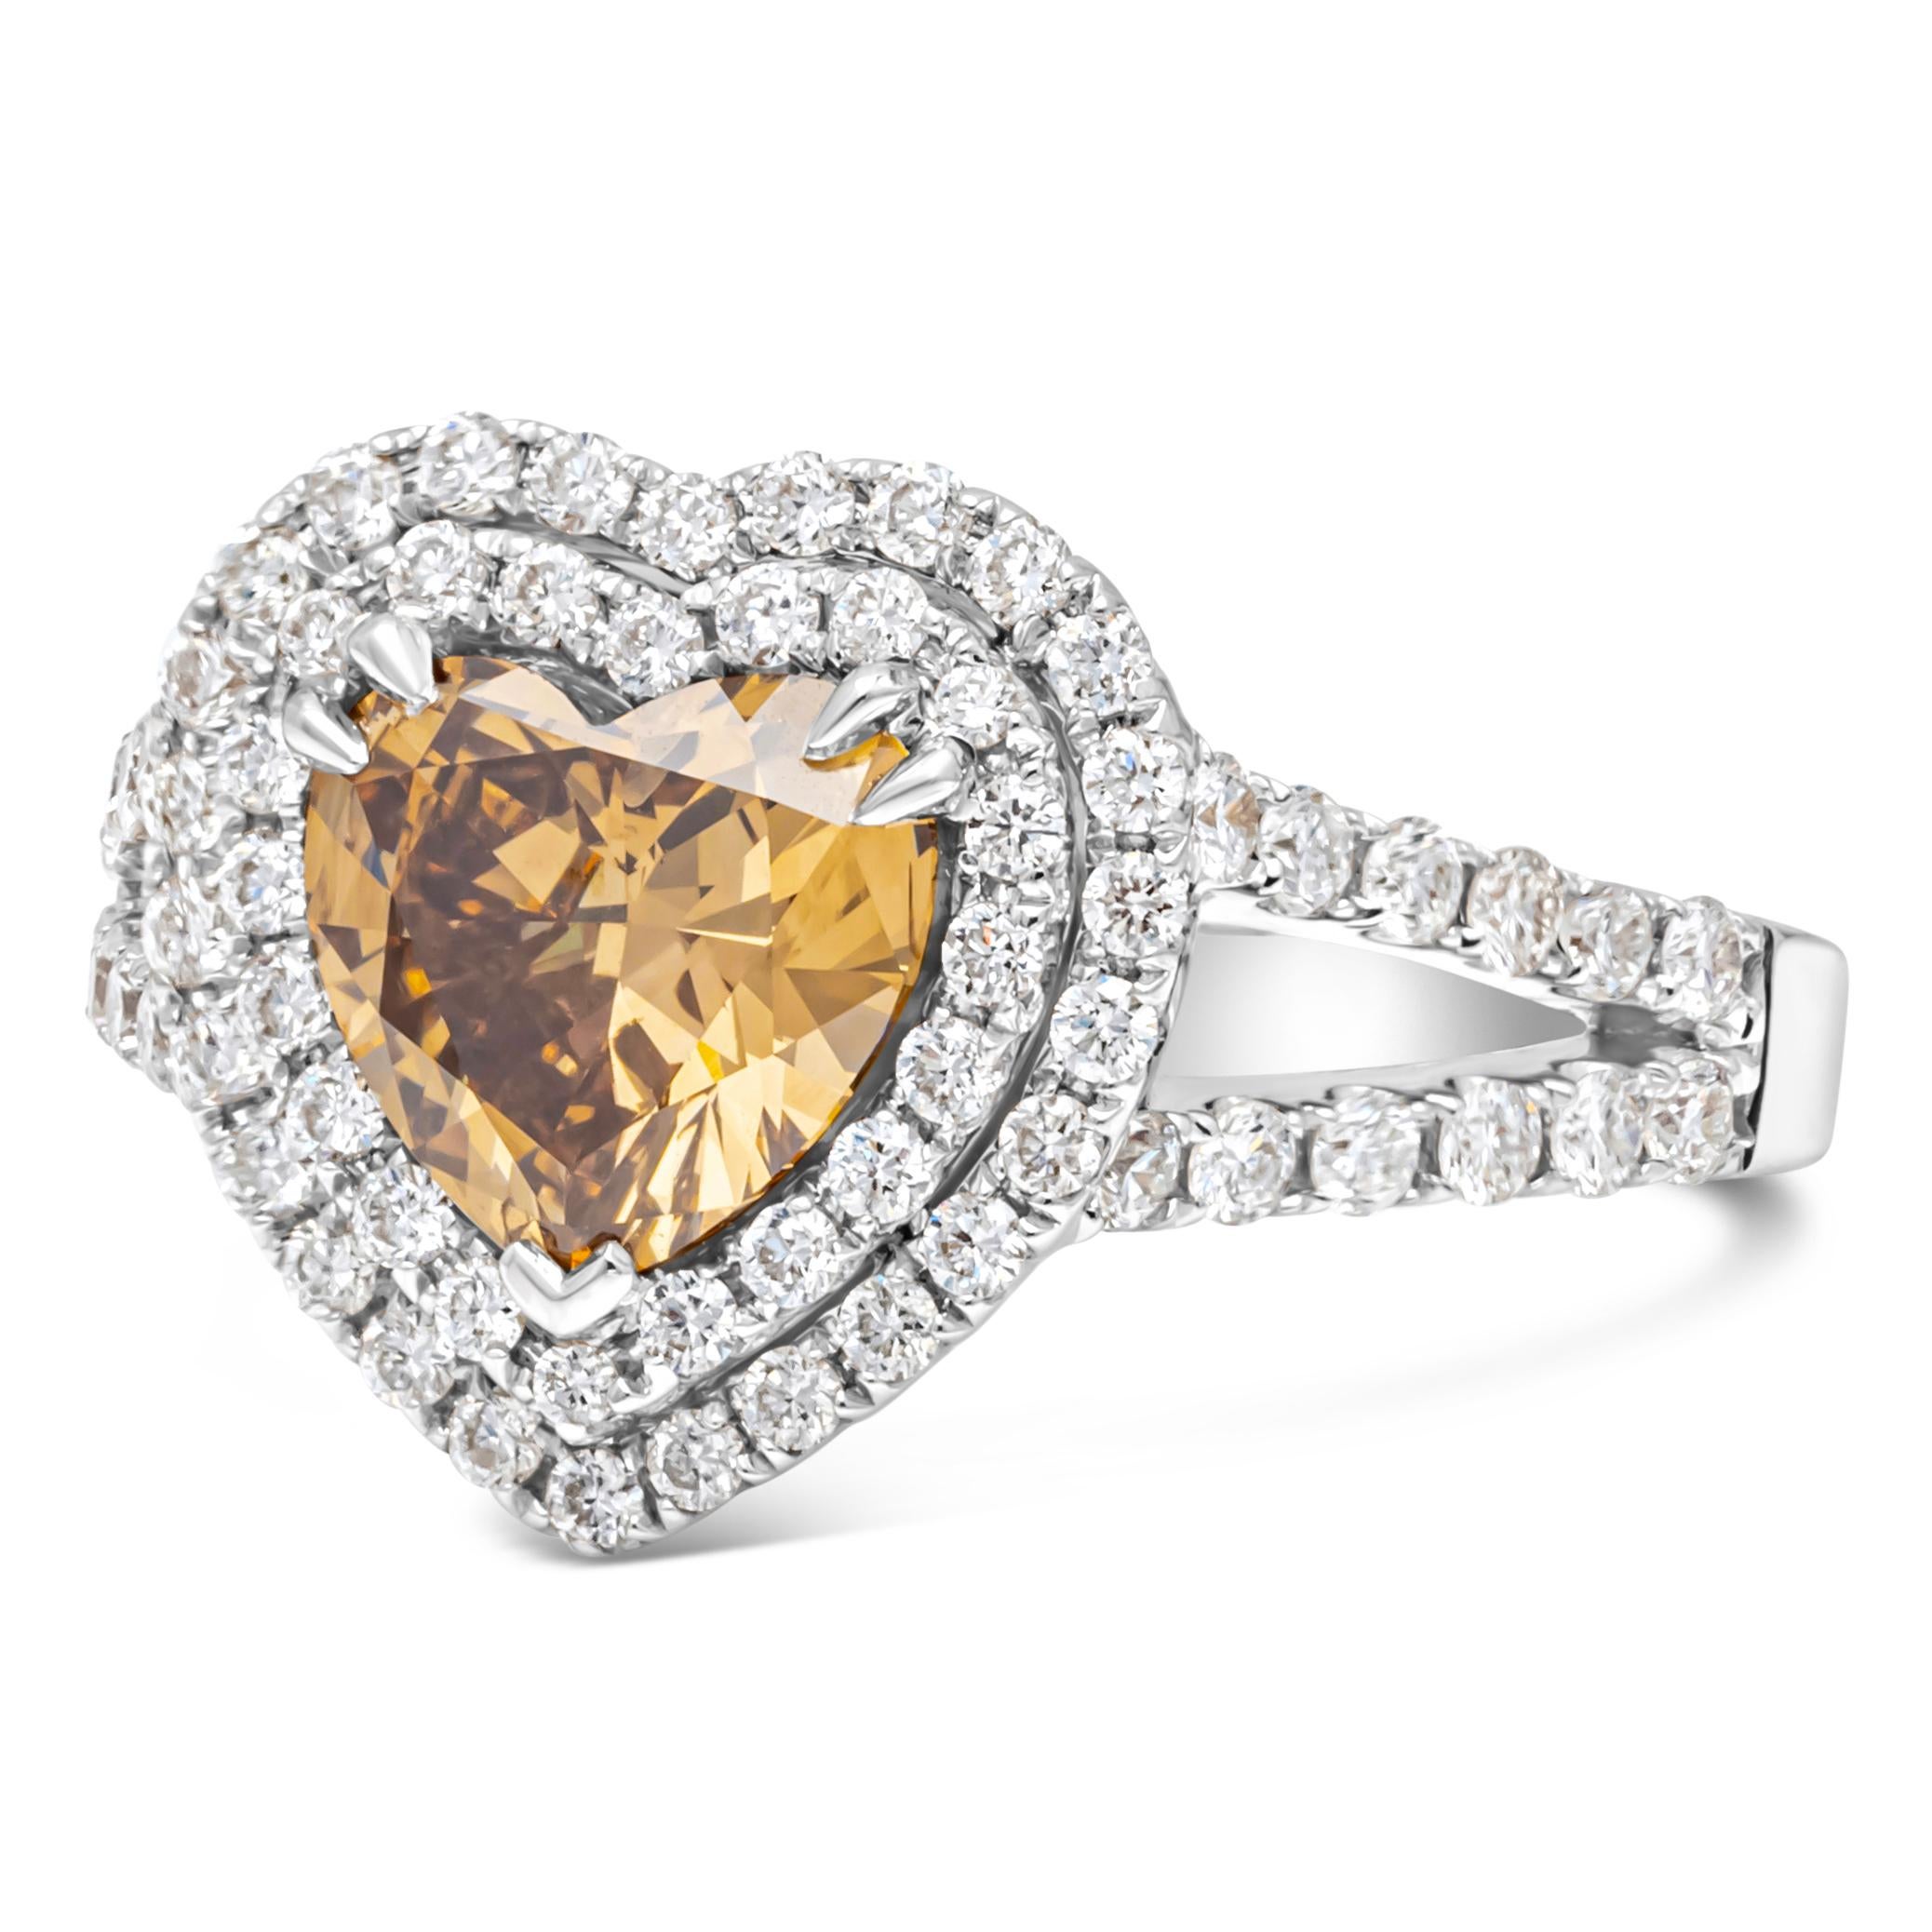 An elegant and color-rich engagement ring, showcasing a 1.45 carats heart shape diamond certified by GIA as Fancy Dark Brown Yellow color and SI2 clarity. Surrounded by a double halo of round brilliant cut diamonds and accented by a diamond